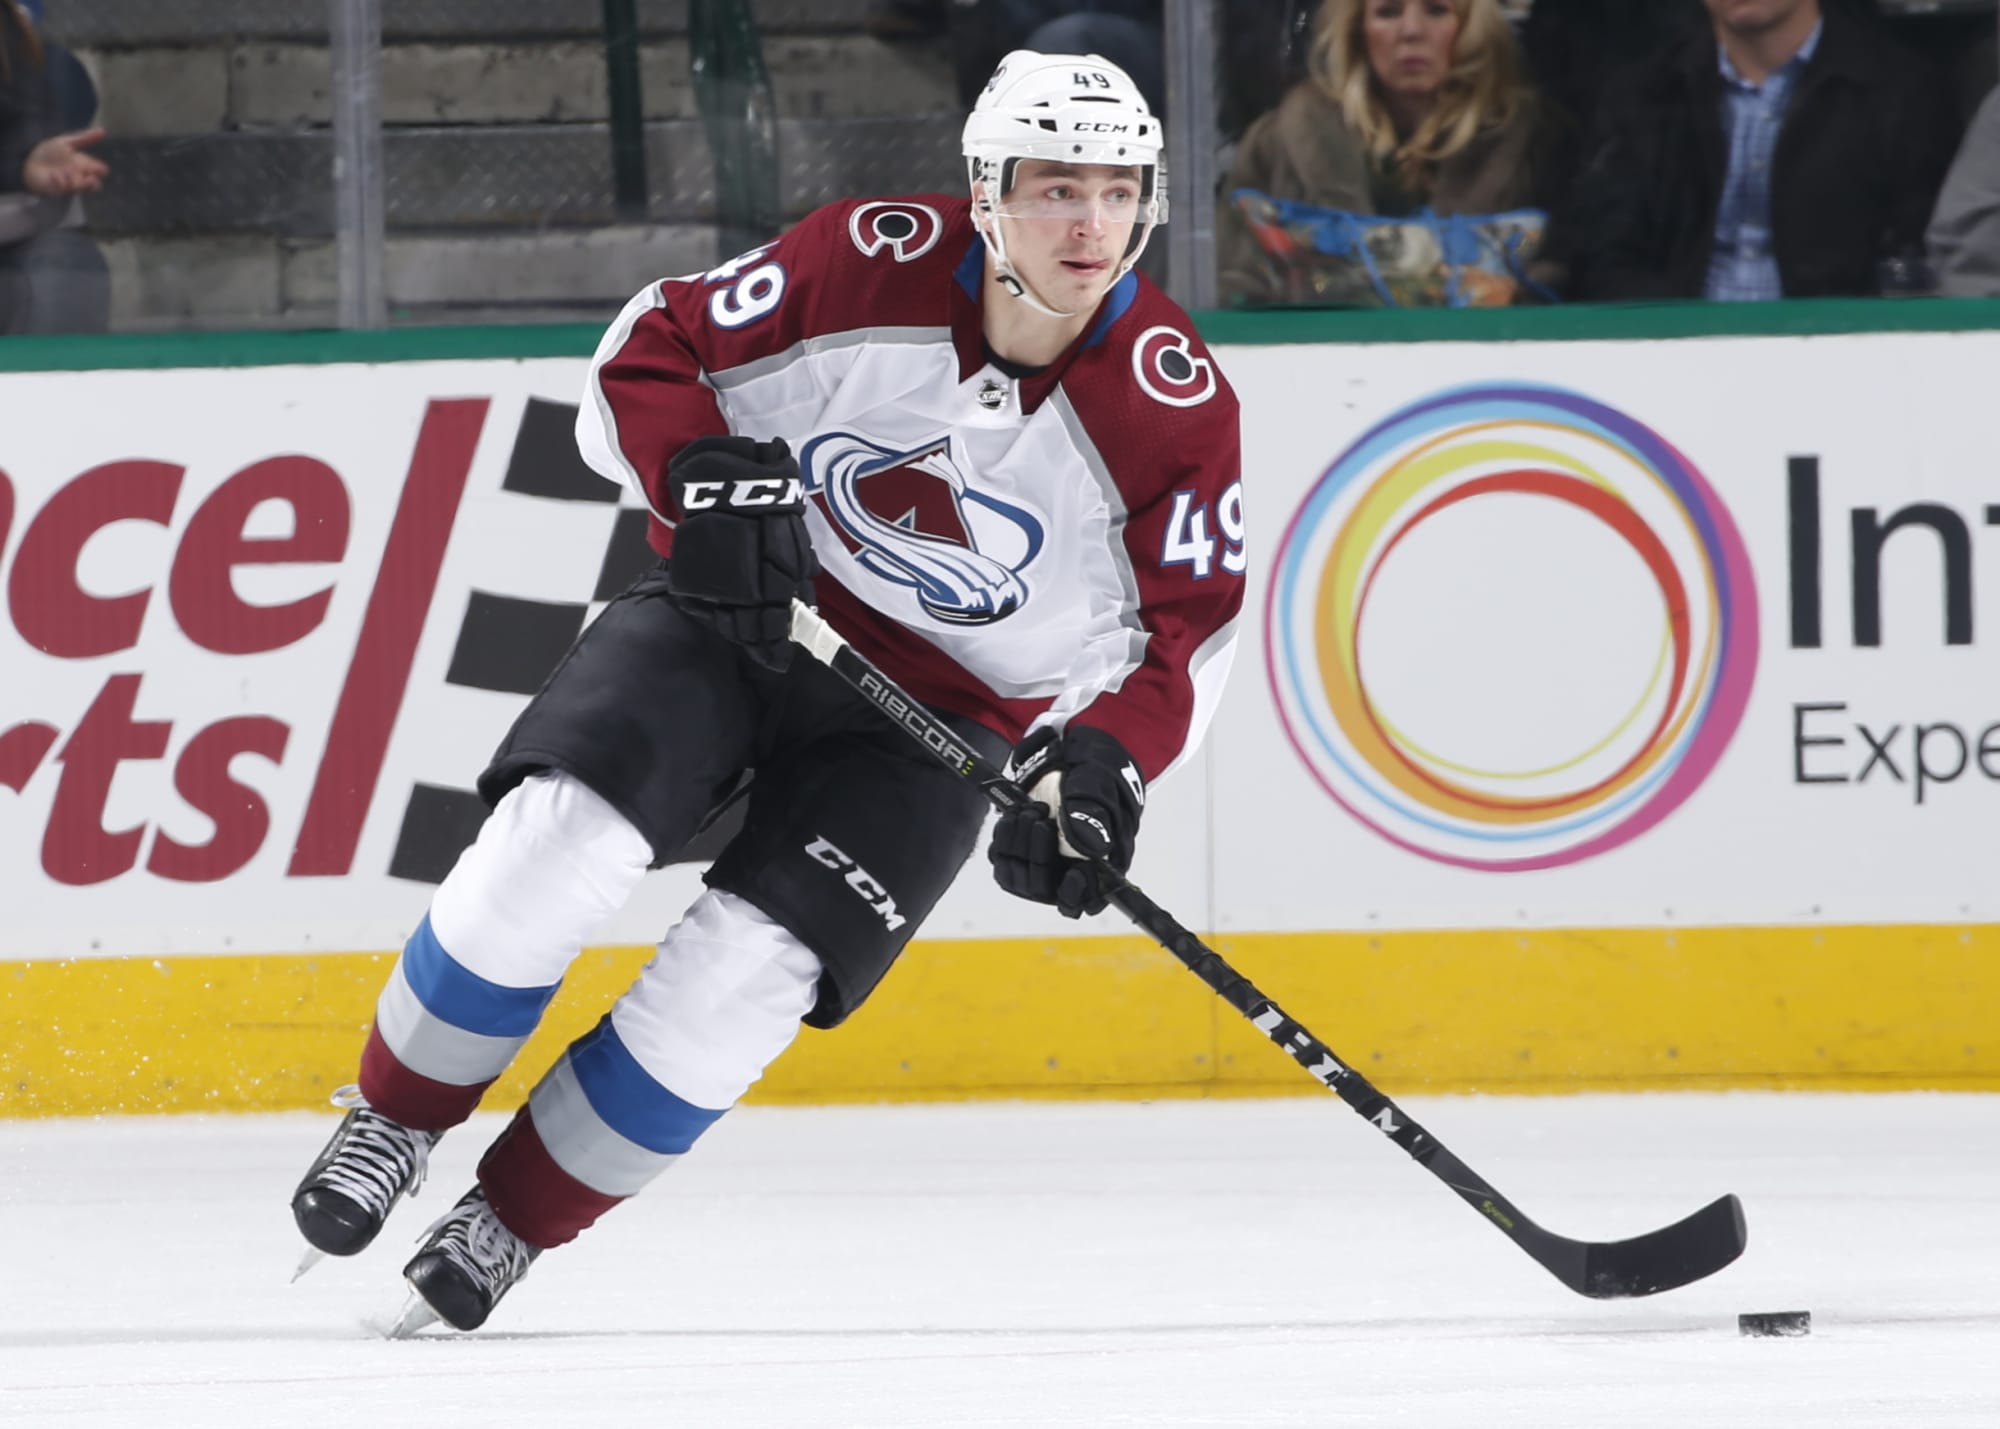 Colorado Avalanche: Sam Girard is Getting Great at Pockets